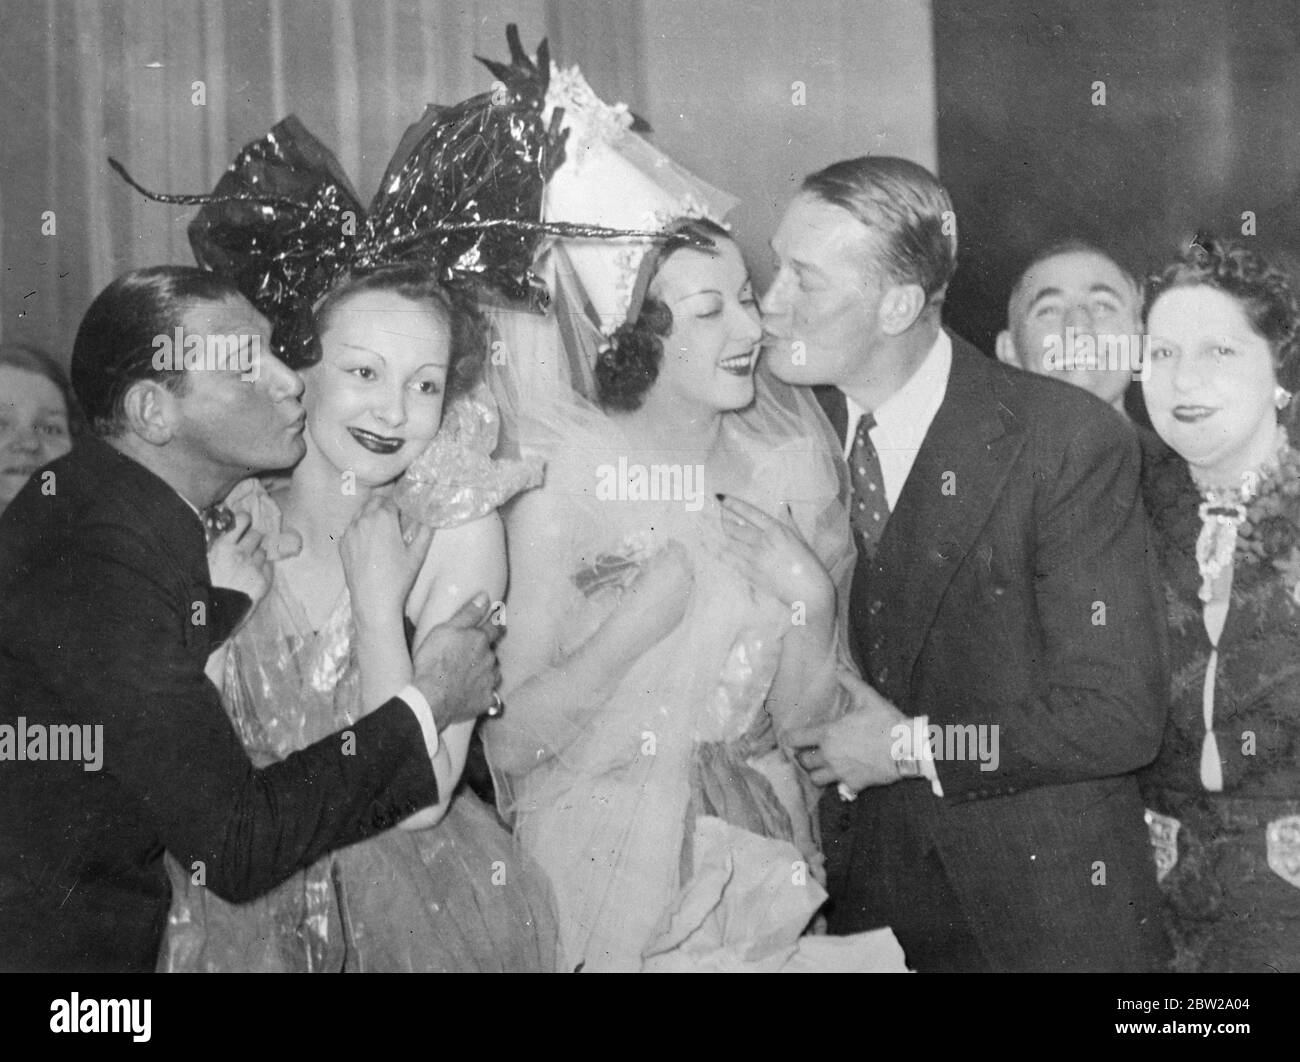 A Chevalier kiss for a Catherinette!. Maurice Chevalier, the film and stage actor (right) and Harry Pilcer, former American dancer and partner of the late Gaby Deslys, stealing kisses from two pretty Catherinettes in Paris during the St Catherine's Day celebrations. Paris 'midinettes' from every dressmaking house in the city, who had reached the aged 25 and were still unmarried, celebrated the Festival of St Catherine, the patron saint, by donning the traditional bonnet and making merry until the small hours of the morning. 26November 1937 Stock Photo